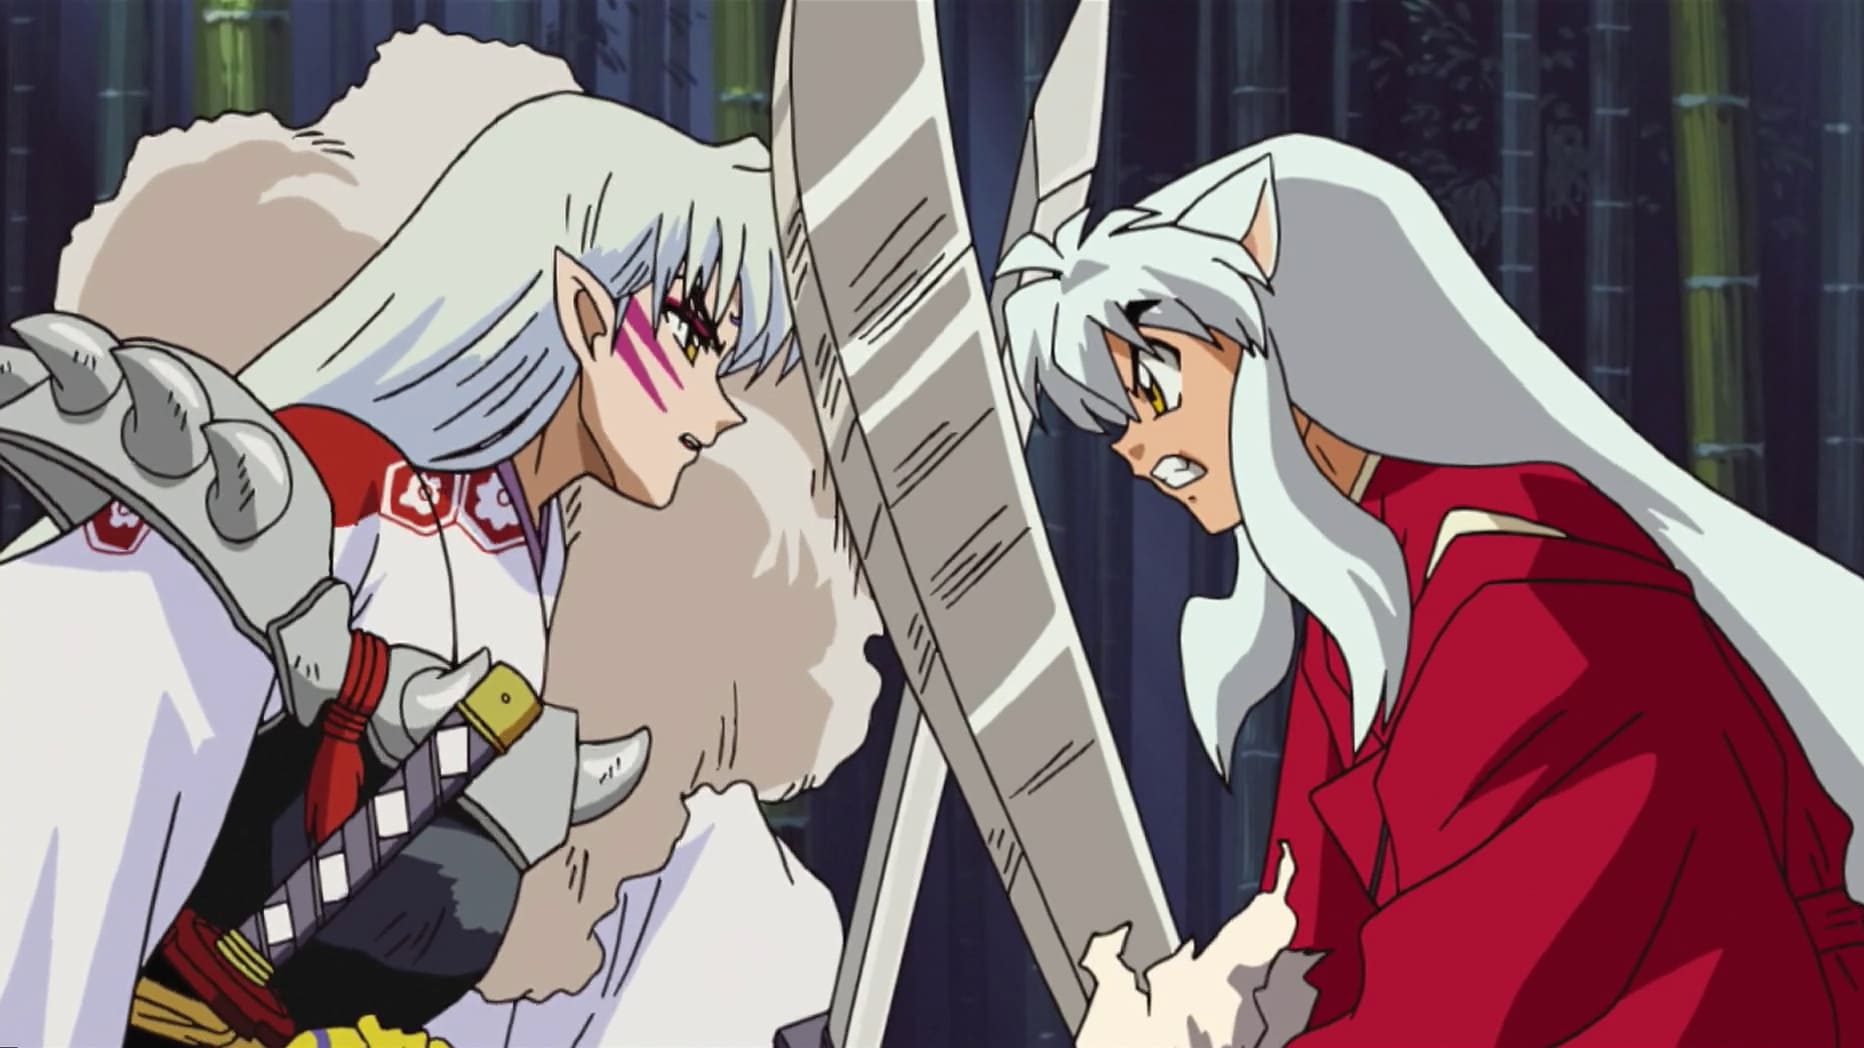 inuyasha-the-movie-2-the-castle-beyond-the-looking-glass